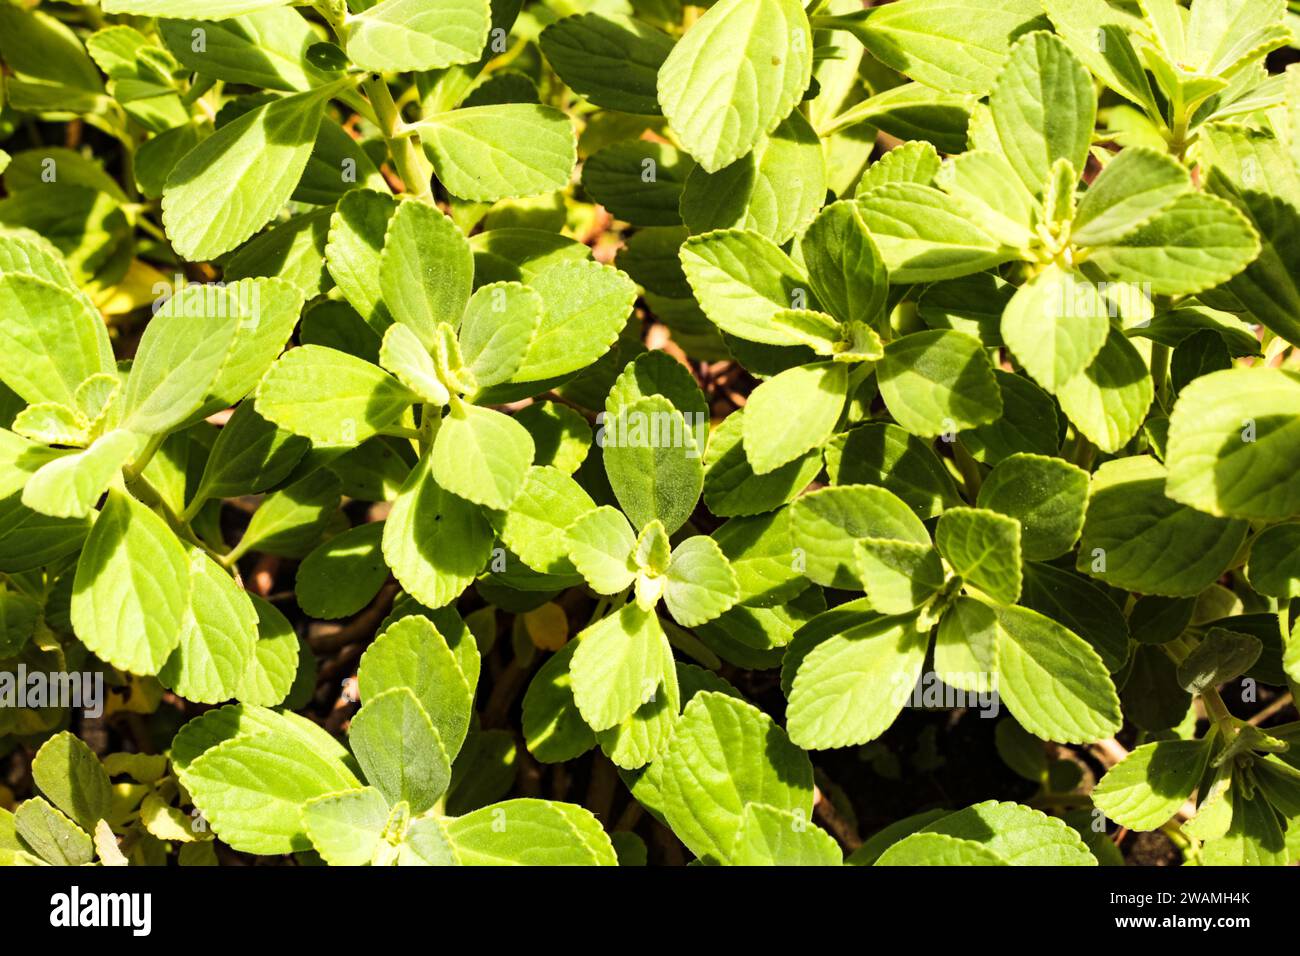 Plectranthus barbatus, called Boldo in Brazil, plant used in Brazilian folk medicine in the form of tea, for digestive and liver problems Stock Photo